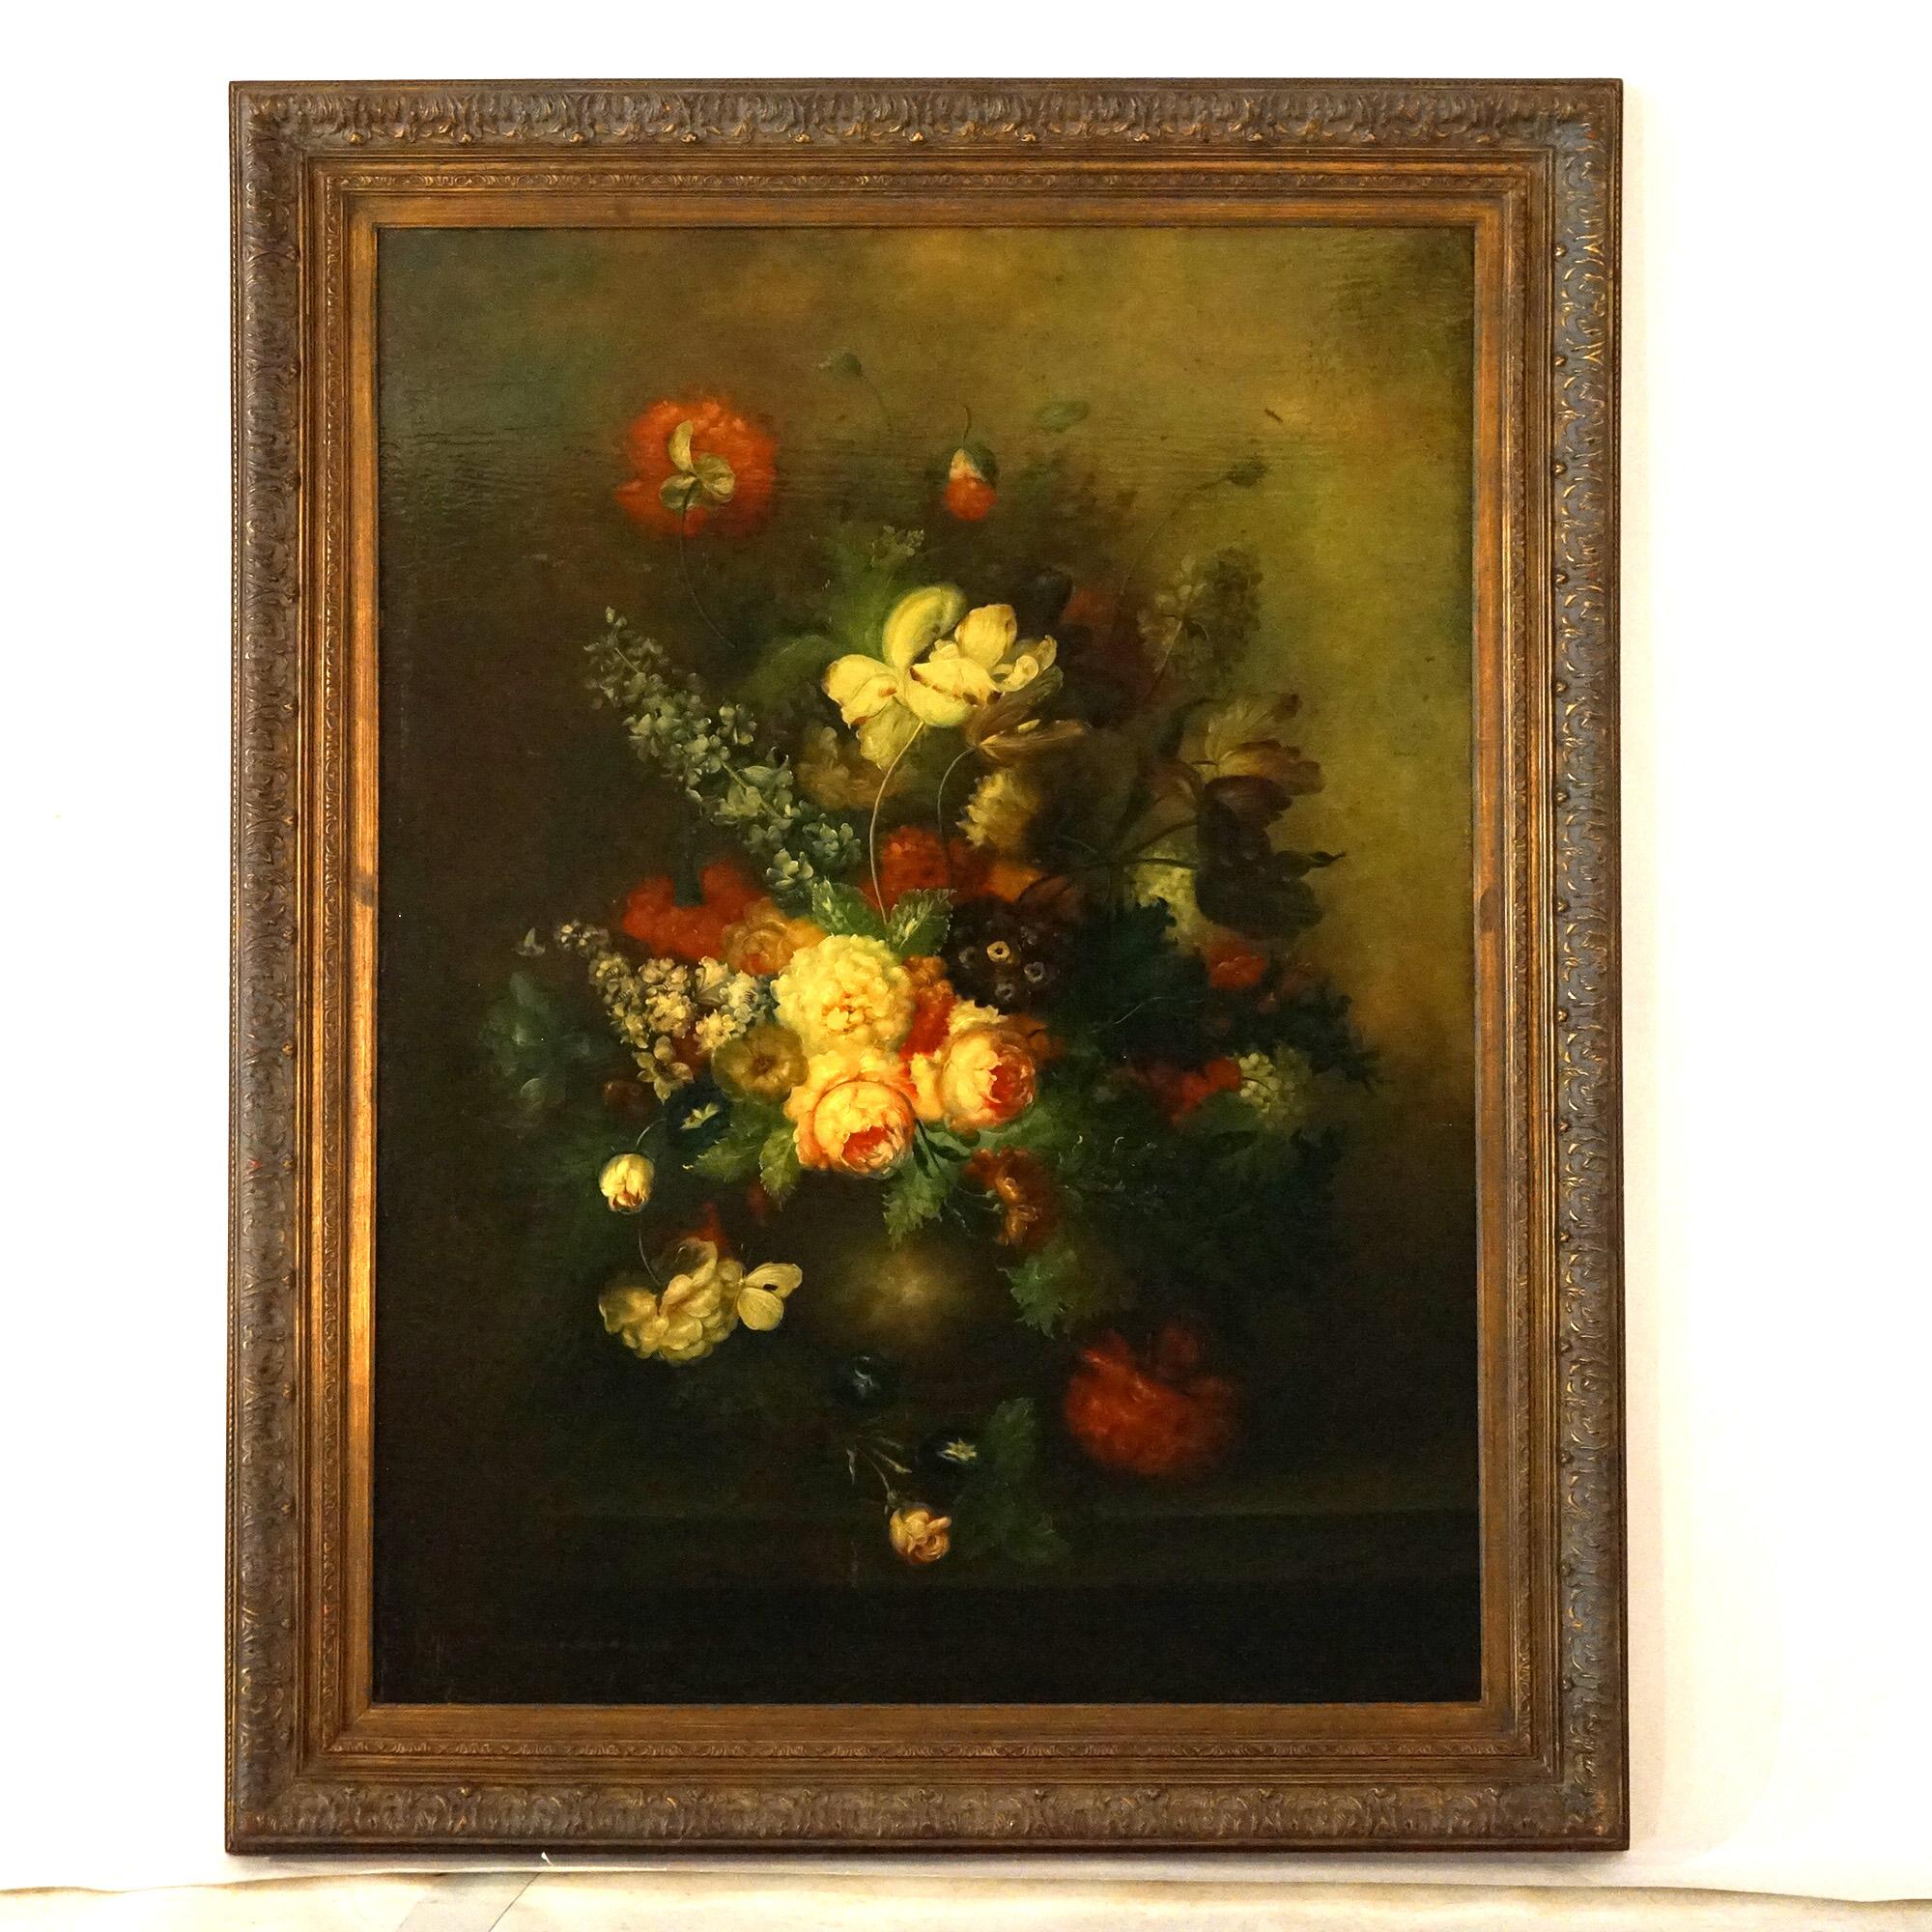 ***Ask About Our Lower In-House Shipping - Reliable, Competitive & Insured***
A monumental painting offers oil on canvas floral still life with table top urn having garden flower arrangement including poppies and peonies, 20th century

Measures -